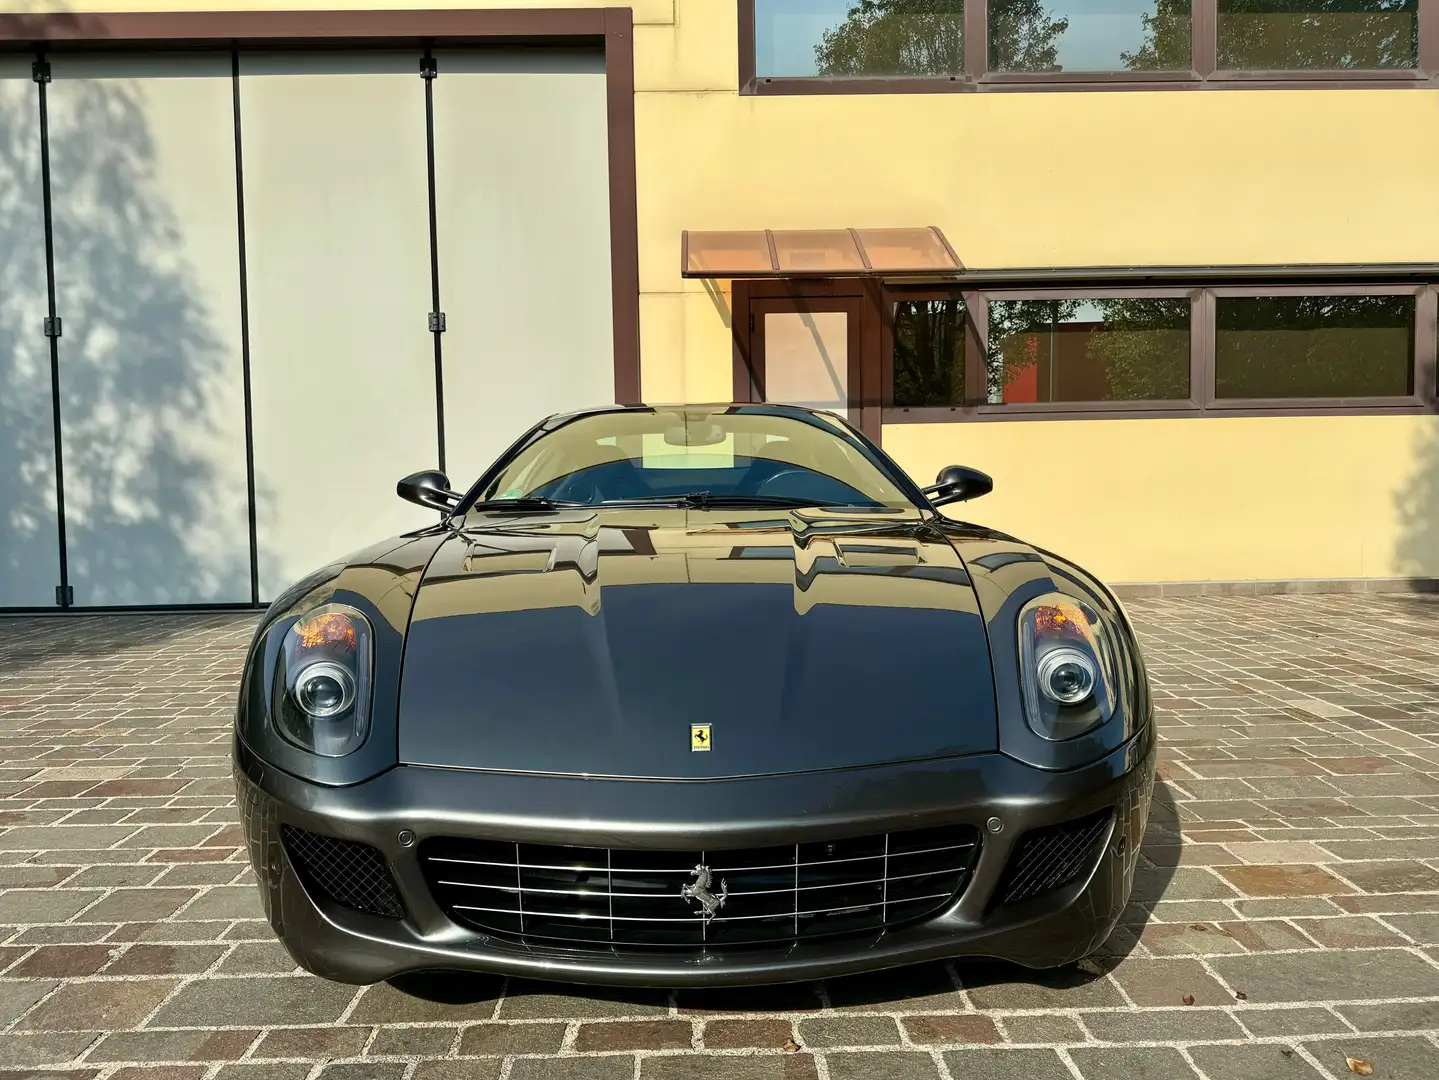 Ferrari 599 599 GTB Fiorano only 9700 km from new, first paint siva - 2